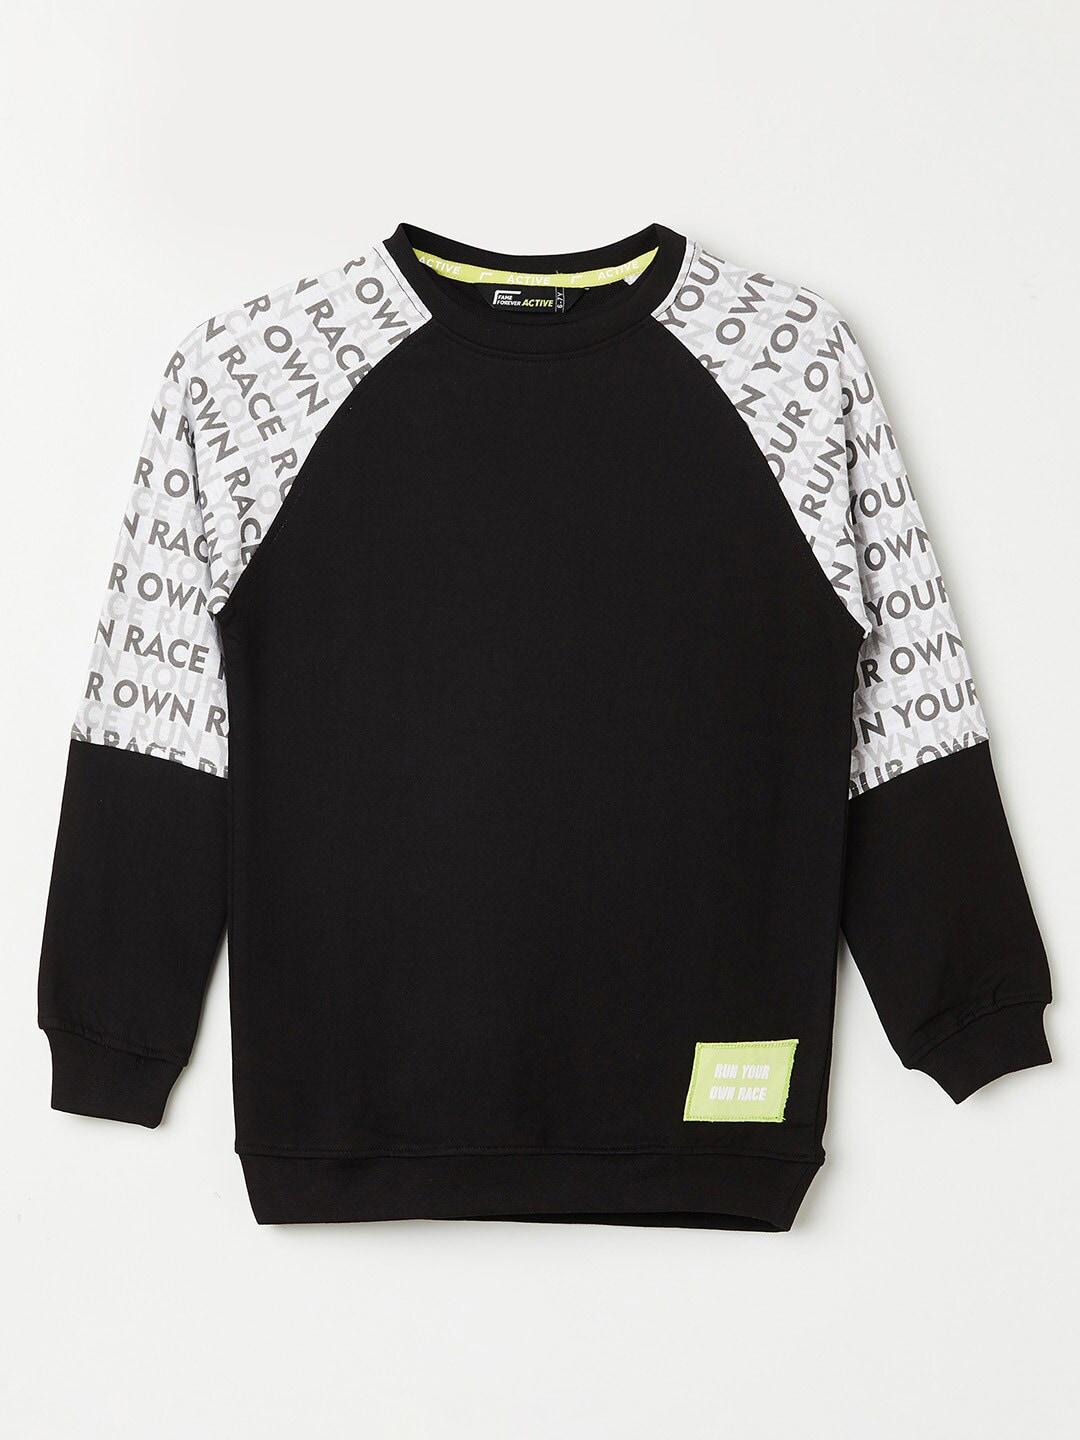 fame-forever-by-lifestyle-boys-black-cotton-sweatshirt